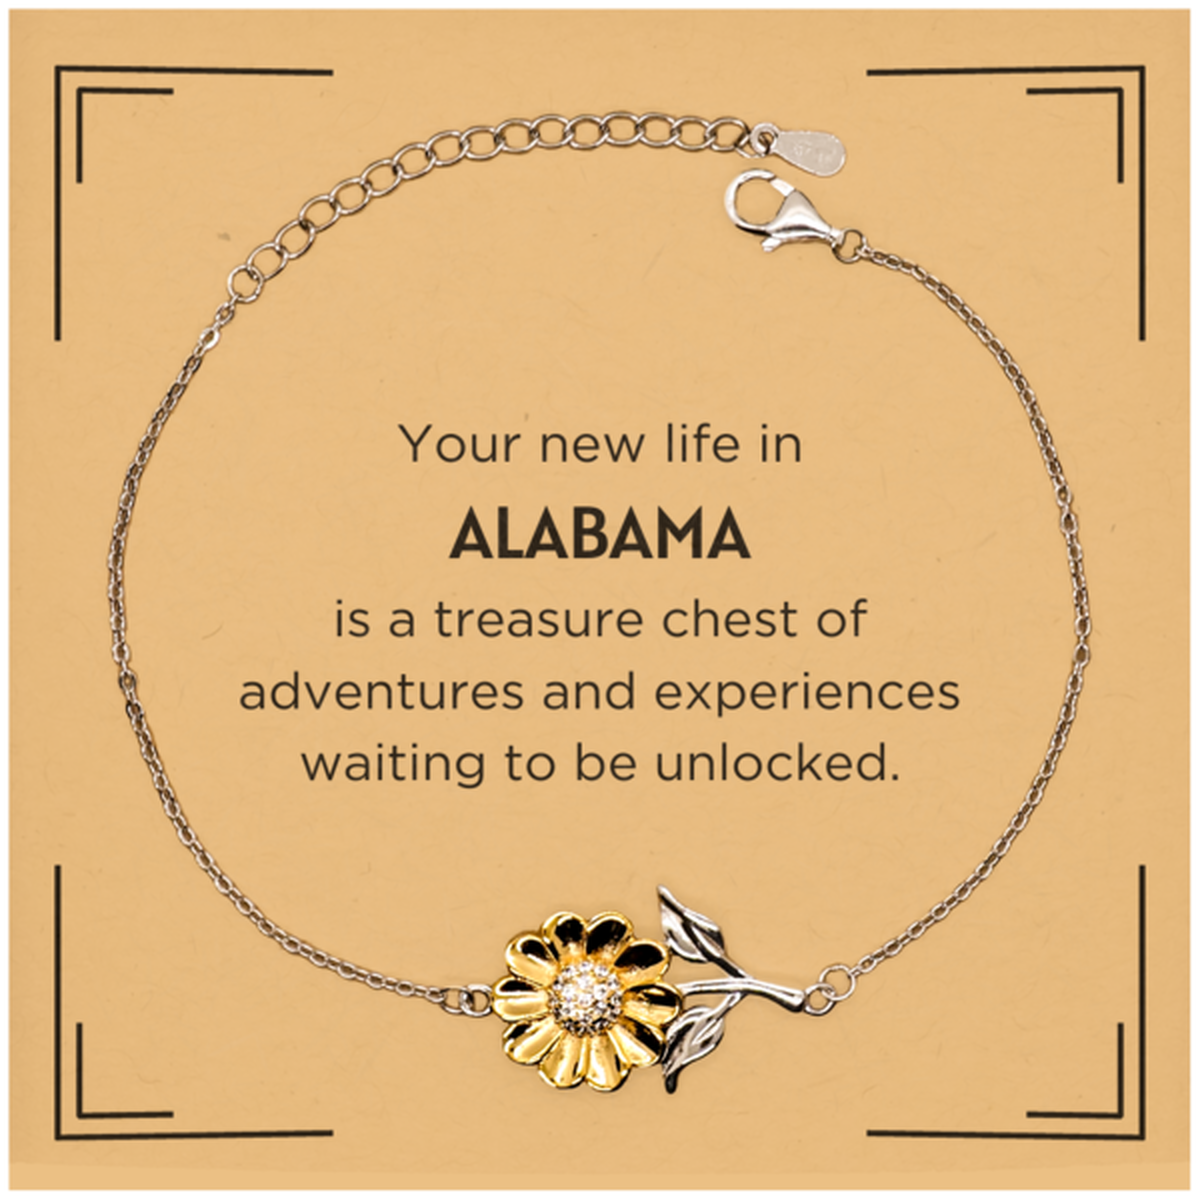 Moving to Alabama Gifts, Your new life in Alabama, Long Distance Alabama Christmas Sunflower Bracelet For Men, Women, Friends, Coworkers